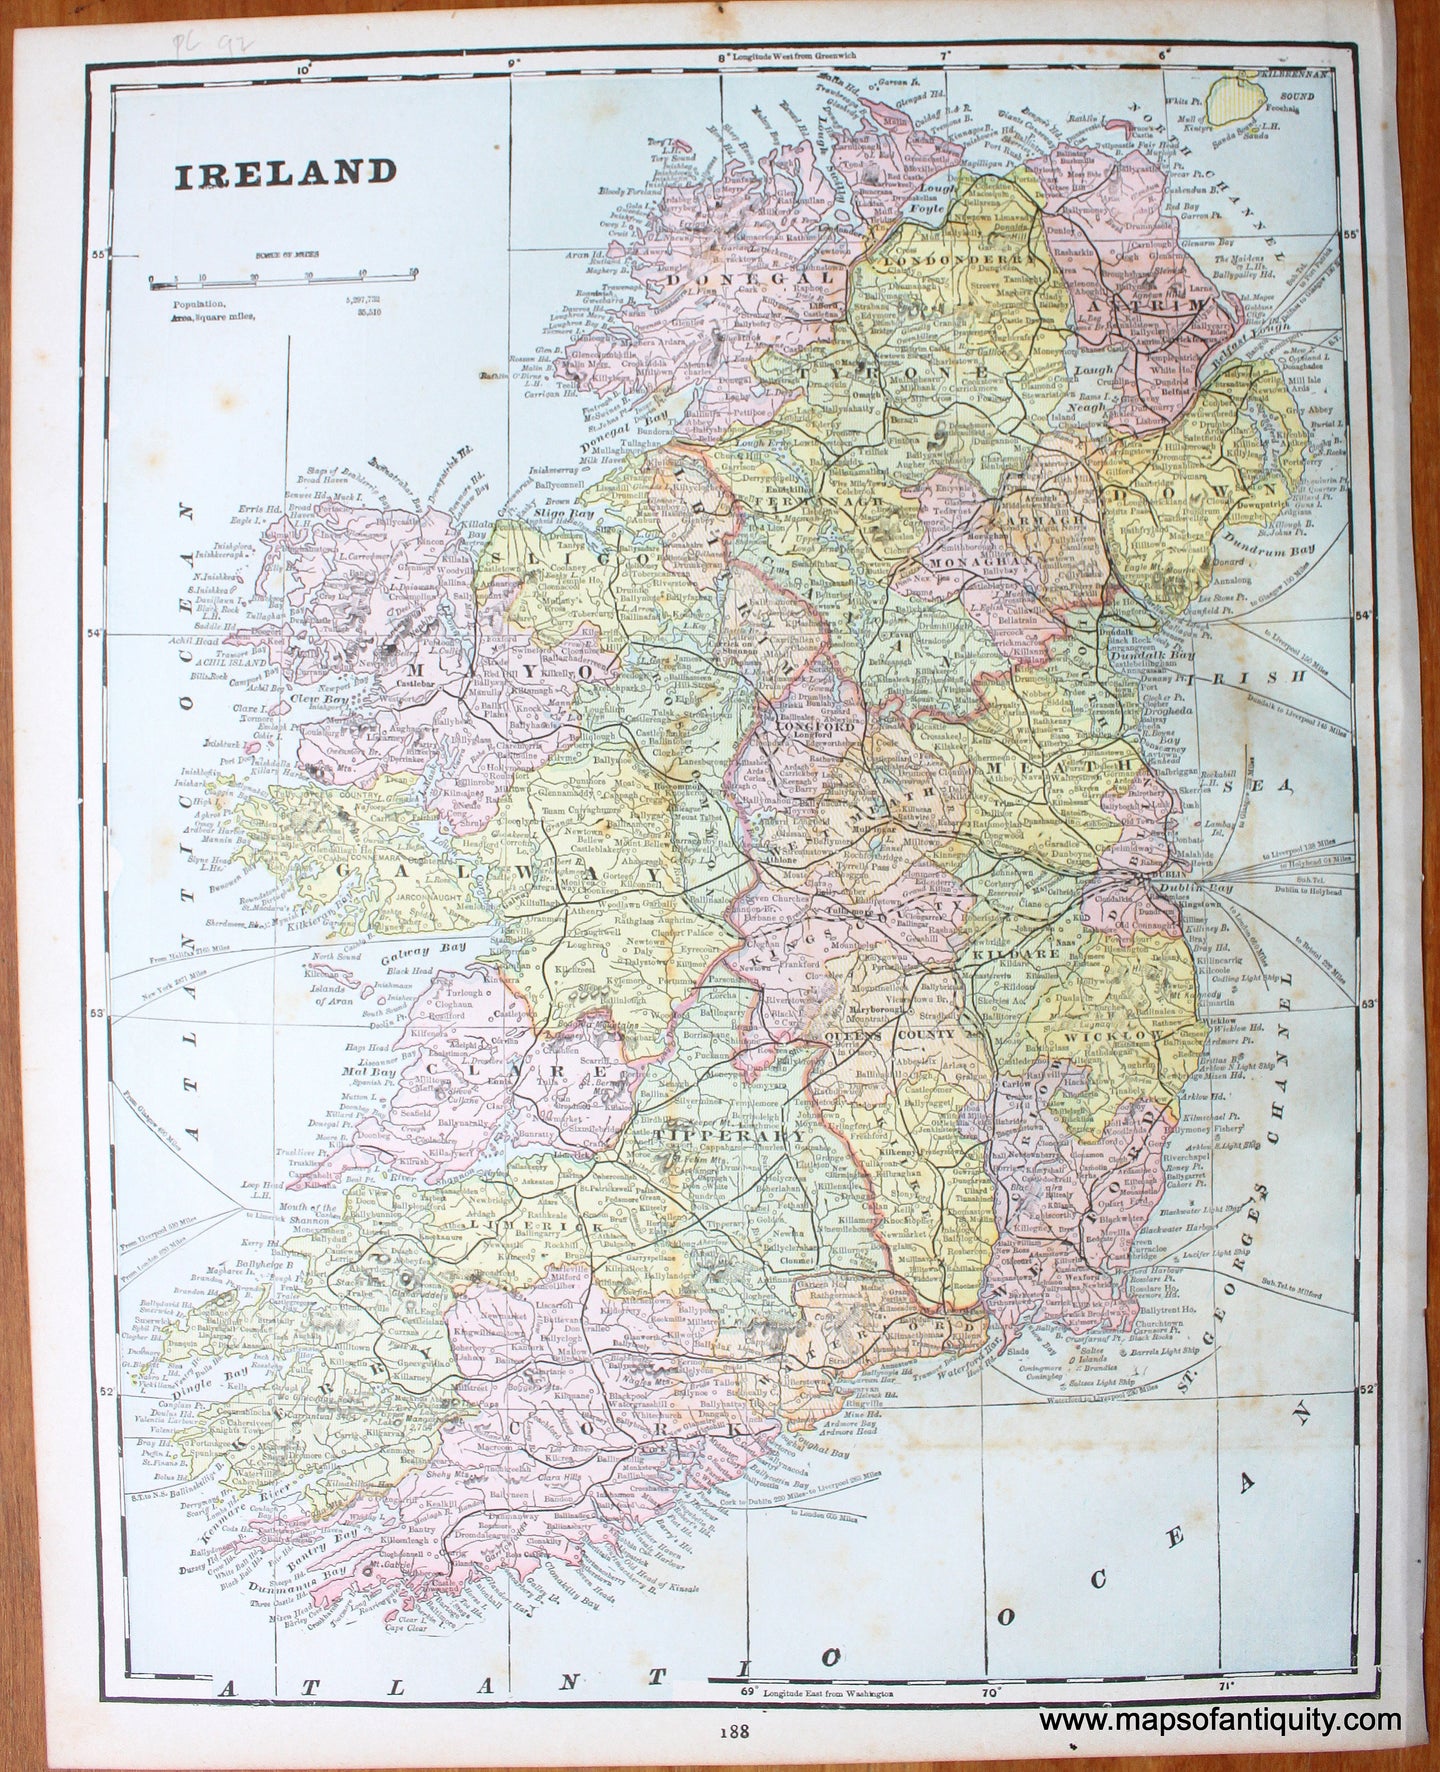 Antique-Map-Ireland-Scotland-History-Historical-Home-Library-and-Supply-Association-Pacific-Coast-1892-1890s-1800s-Late-19th-Century-Maps-of-Antiquity-